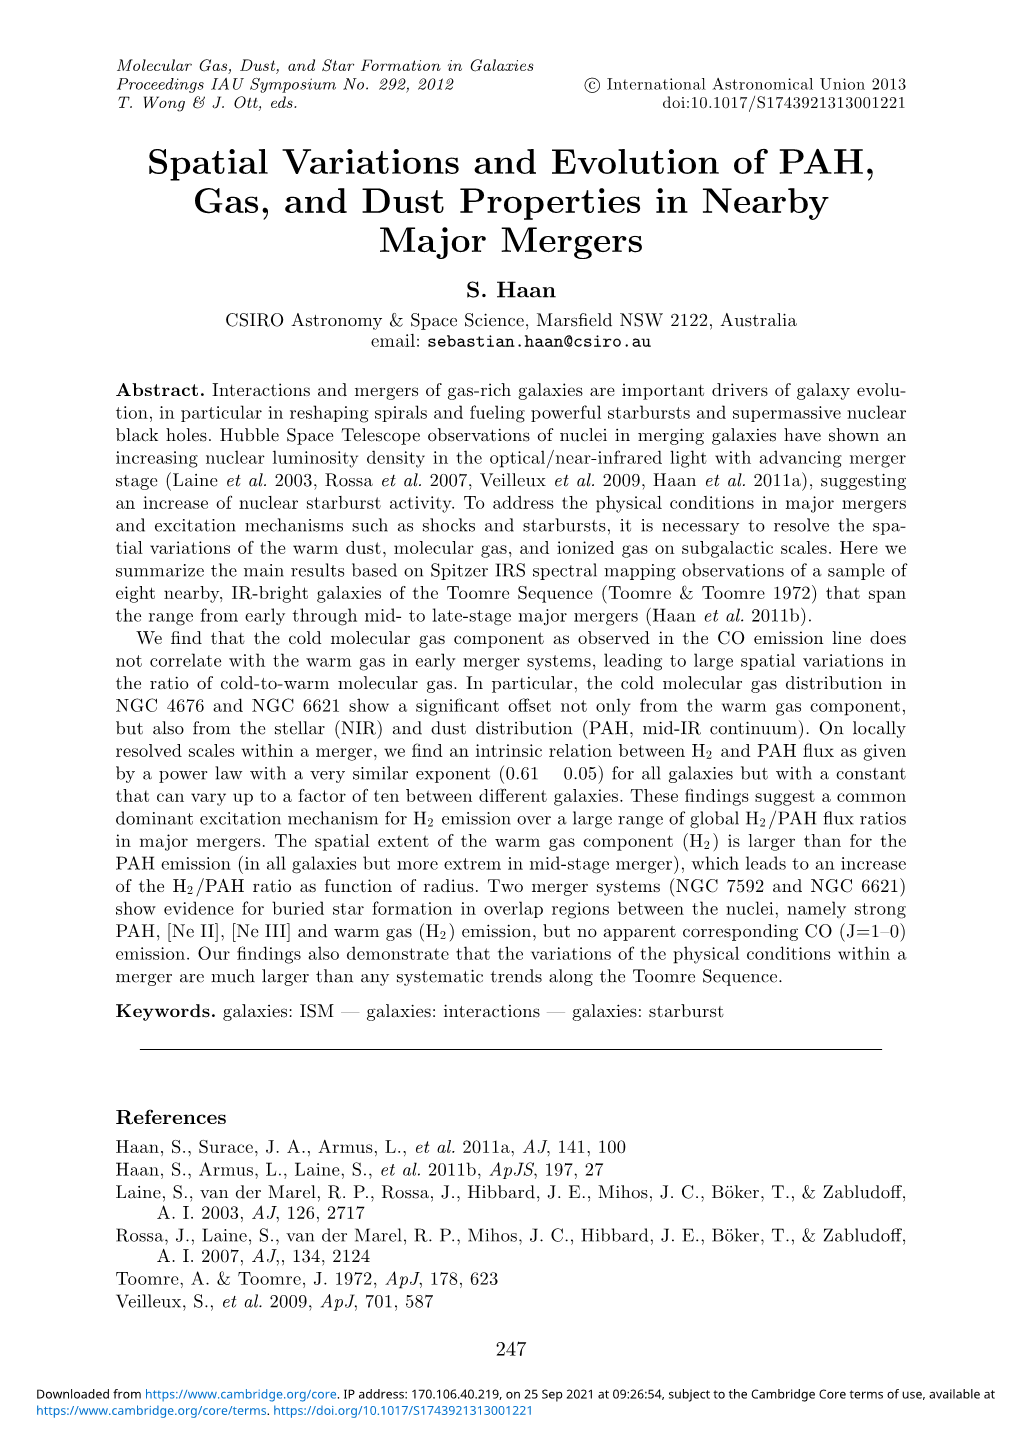 Spatial Variations and Evolution of PAH, Gas, and Dust Properties in Nearby Major Mergers S